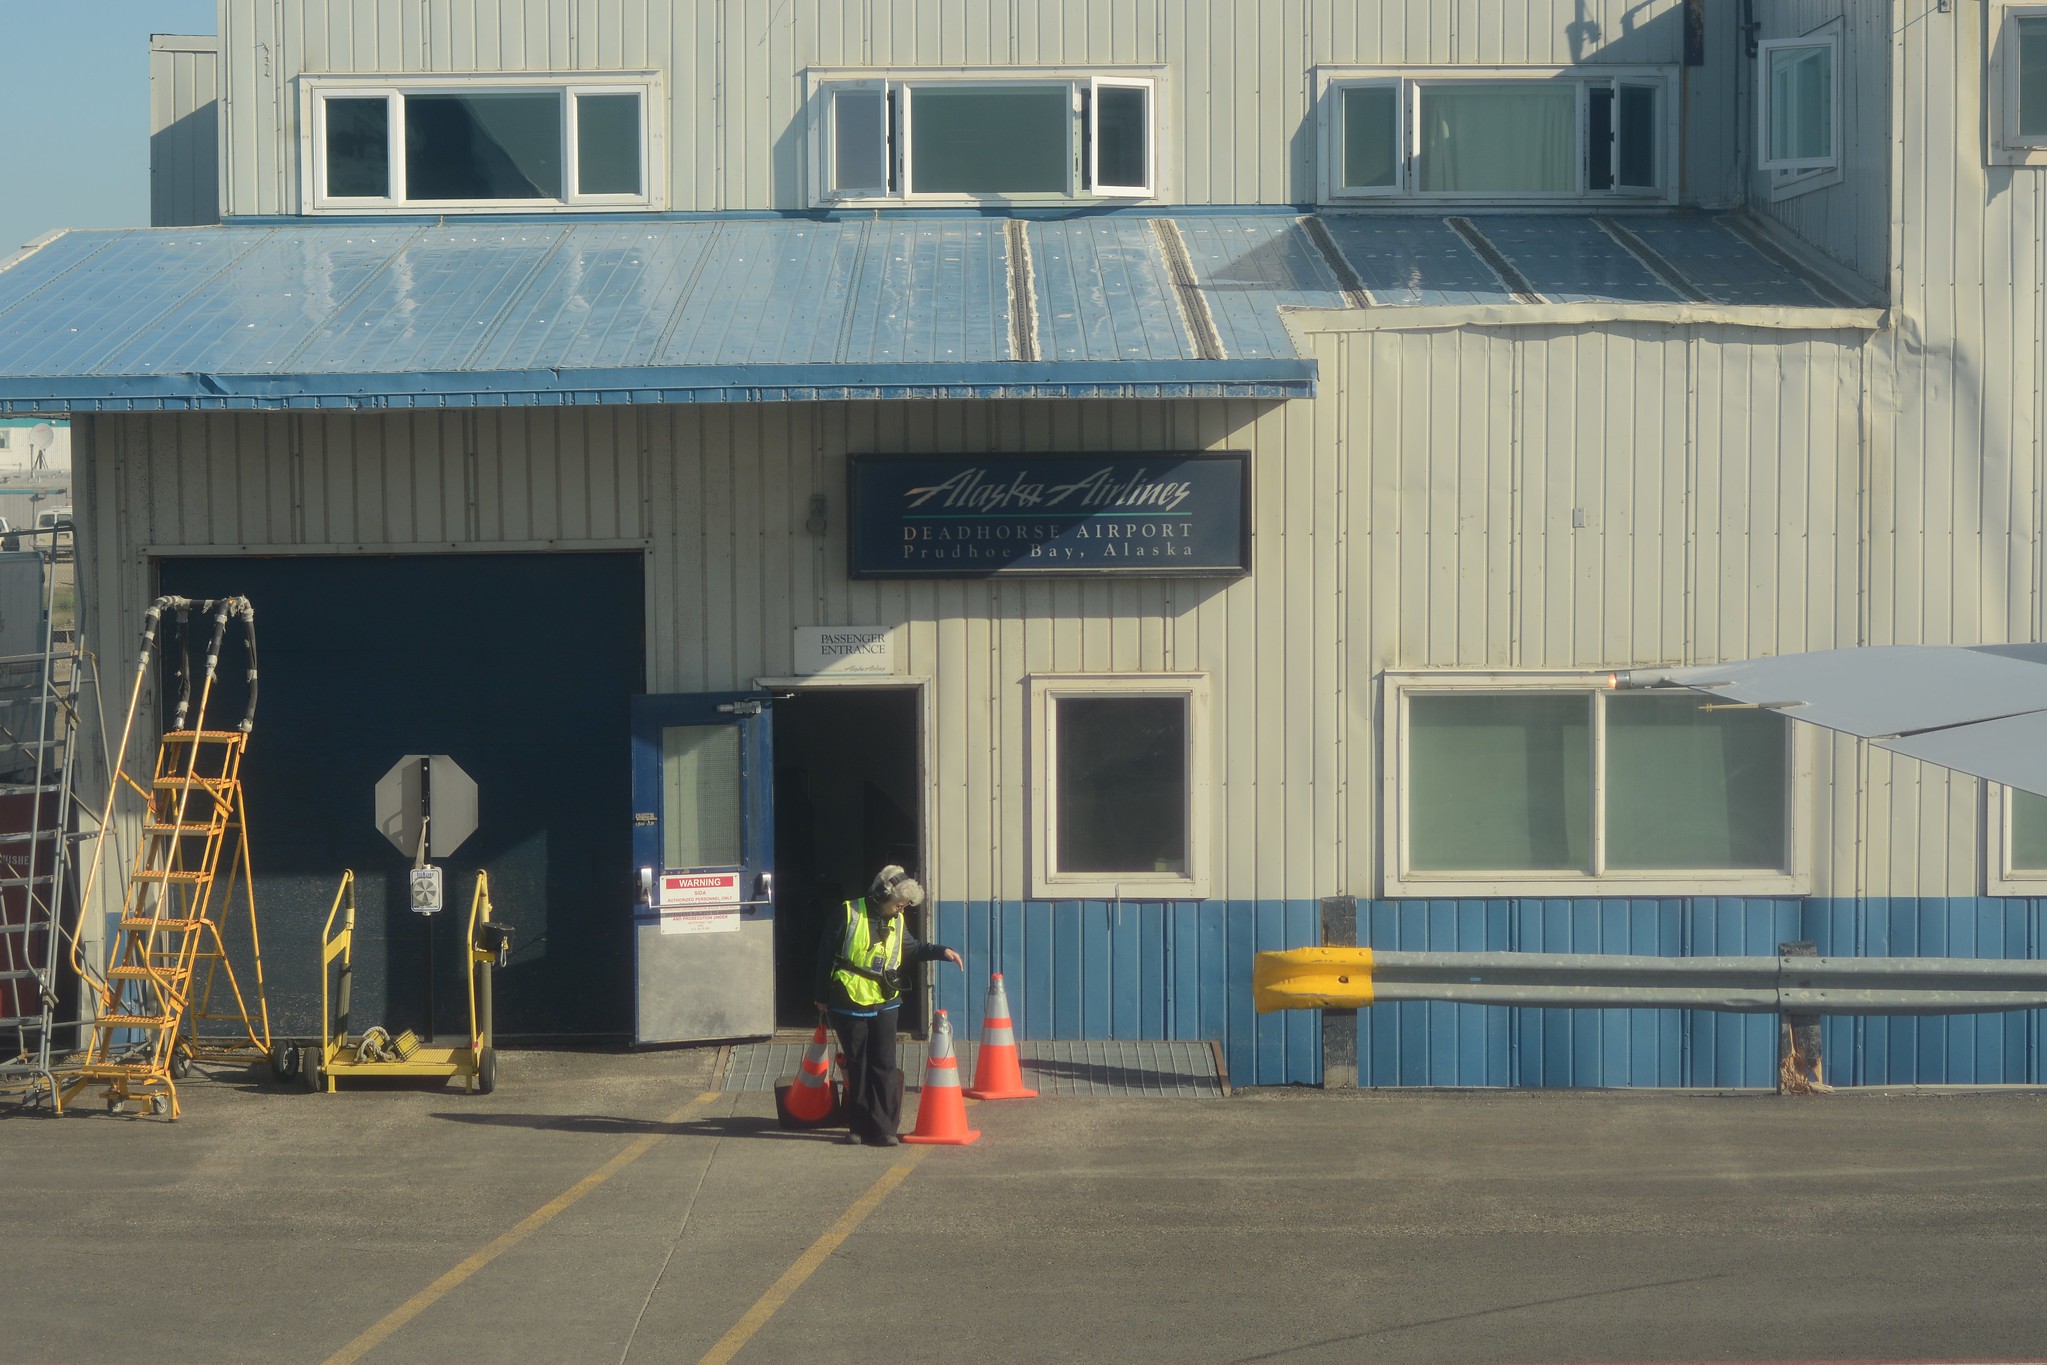 woman airport worker standing outside of deadhorse airport in alaska